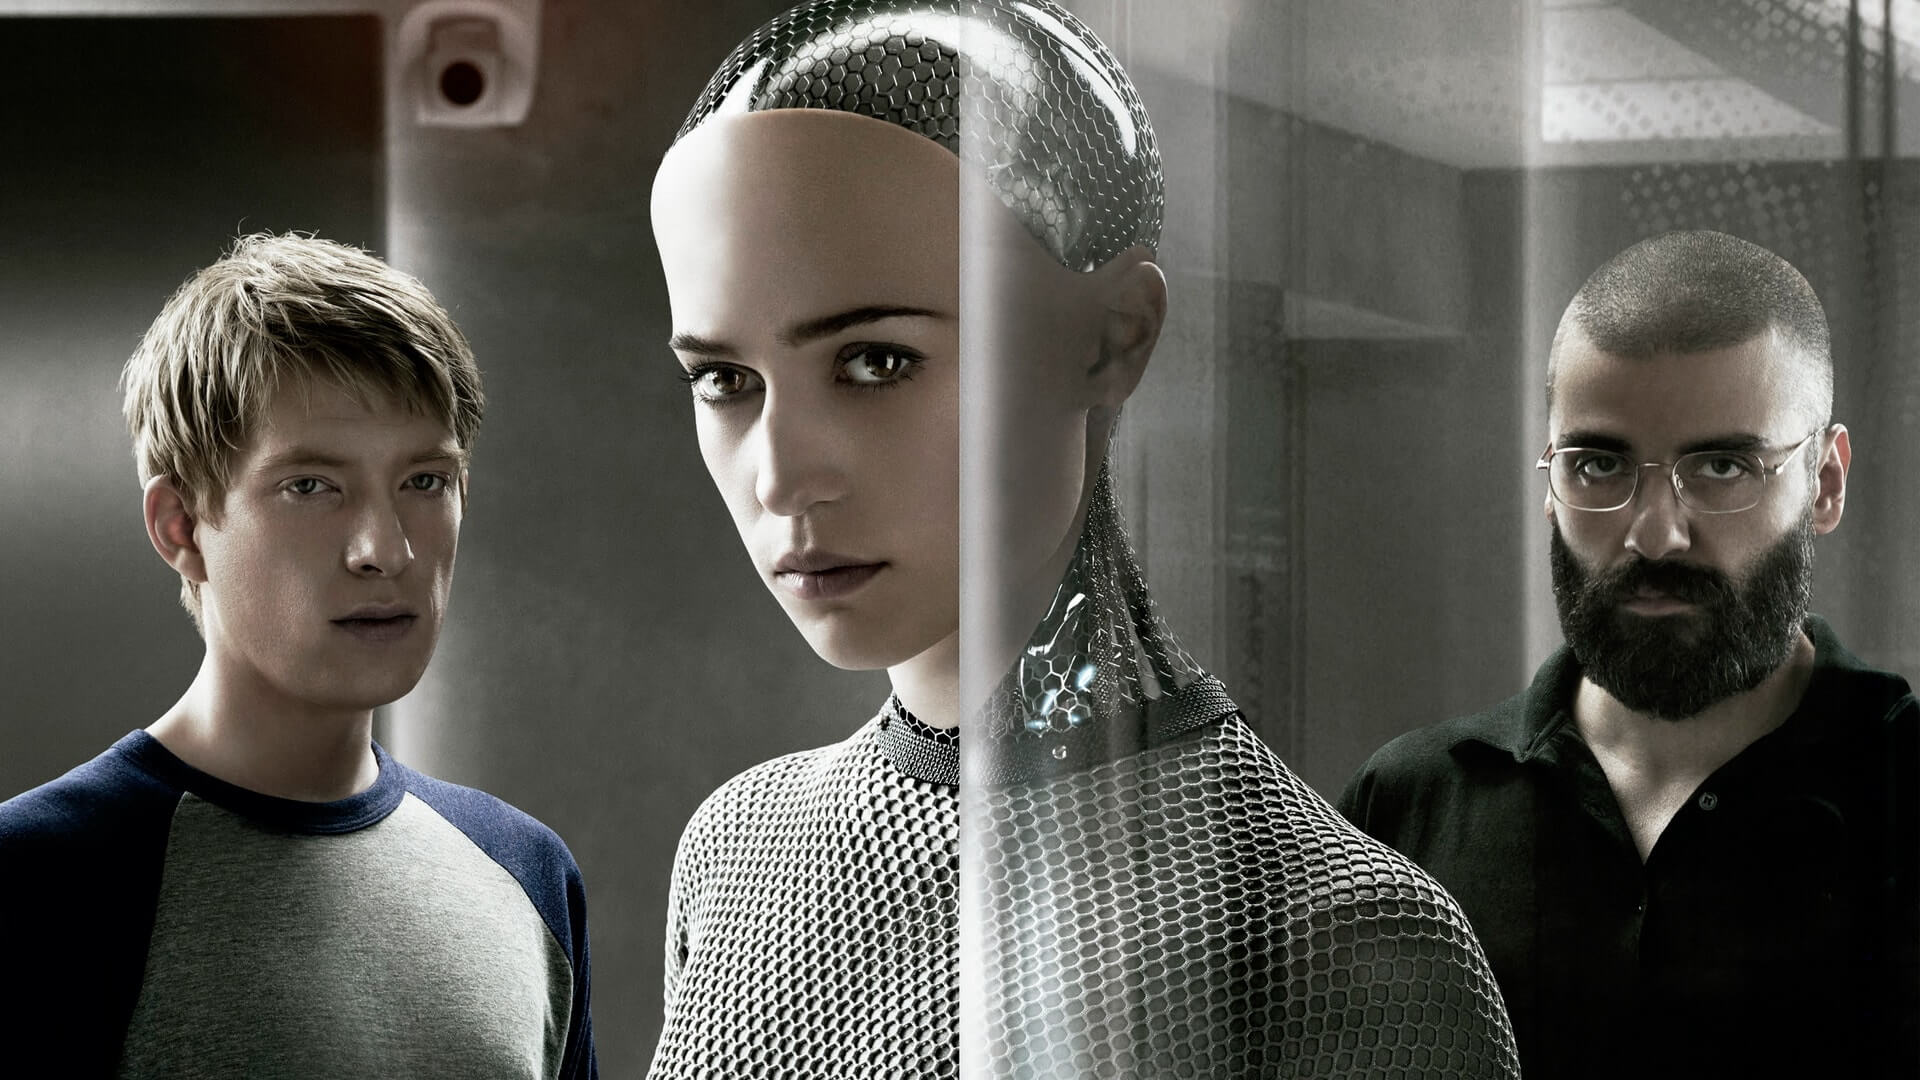 EX MACHINA movie meaning: Confirming to be human